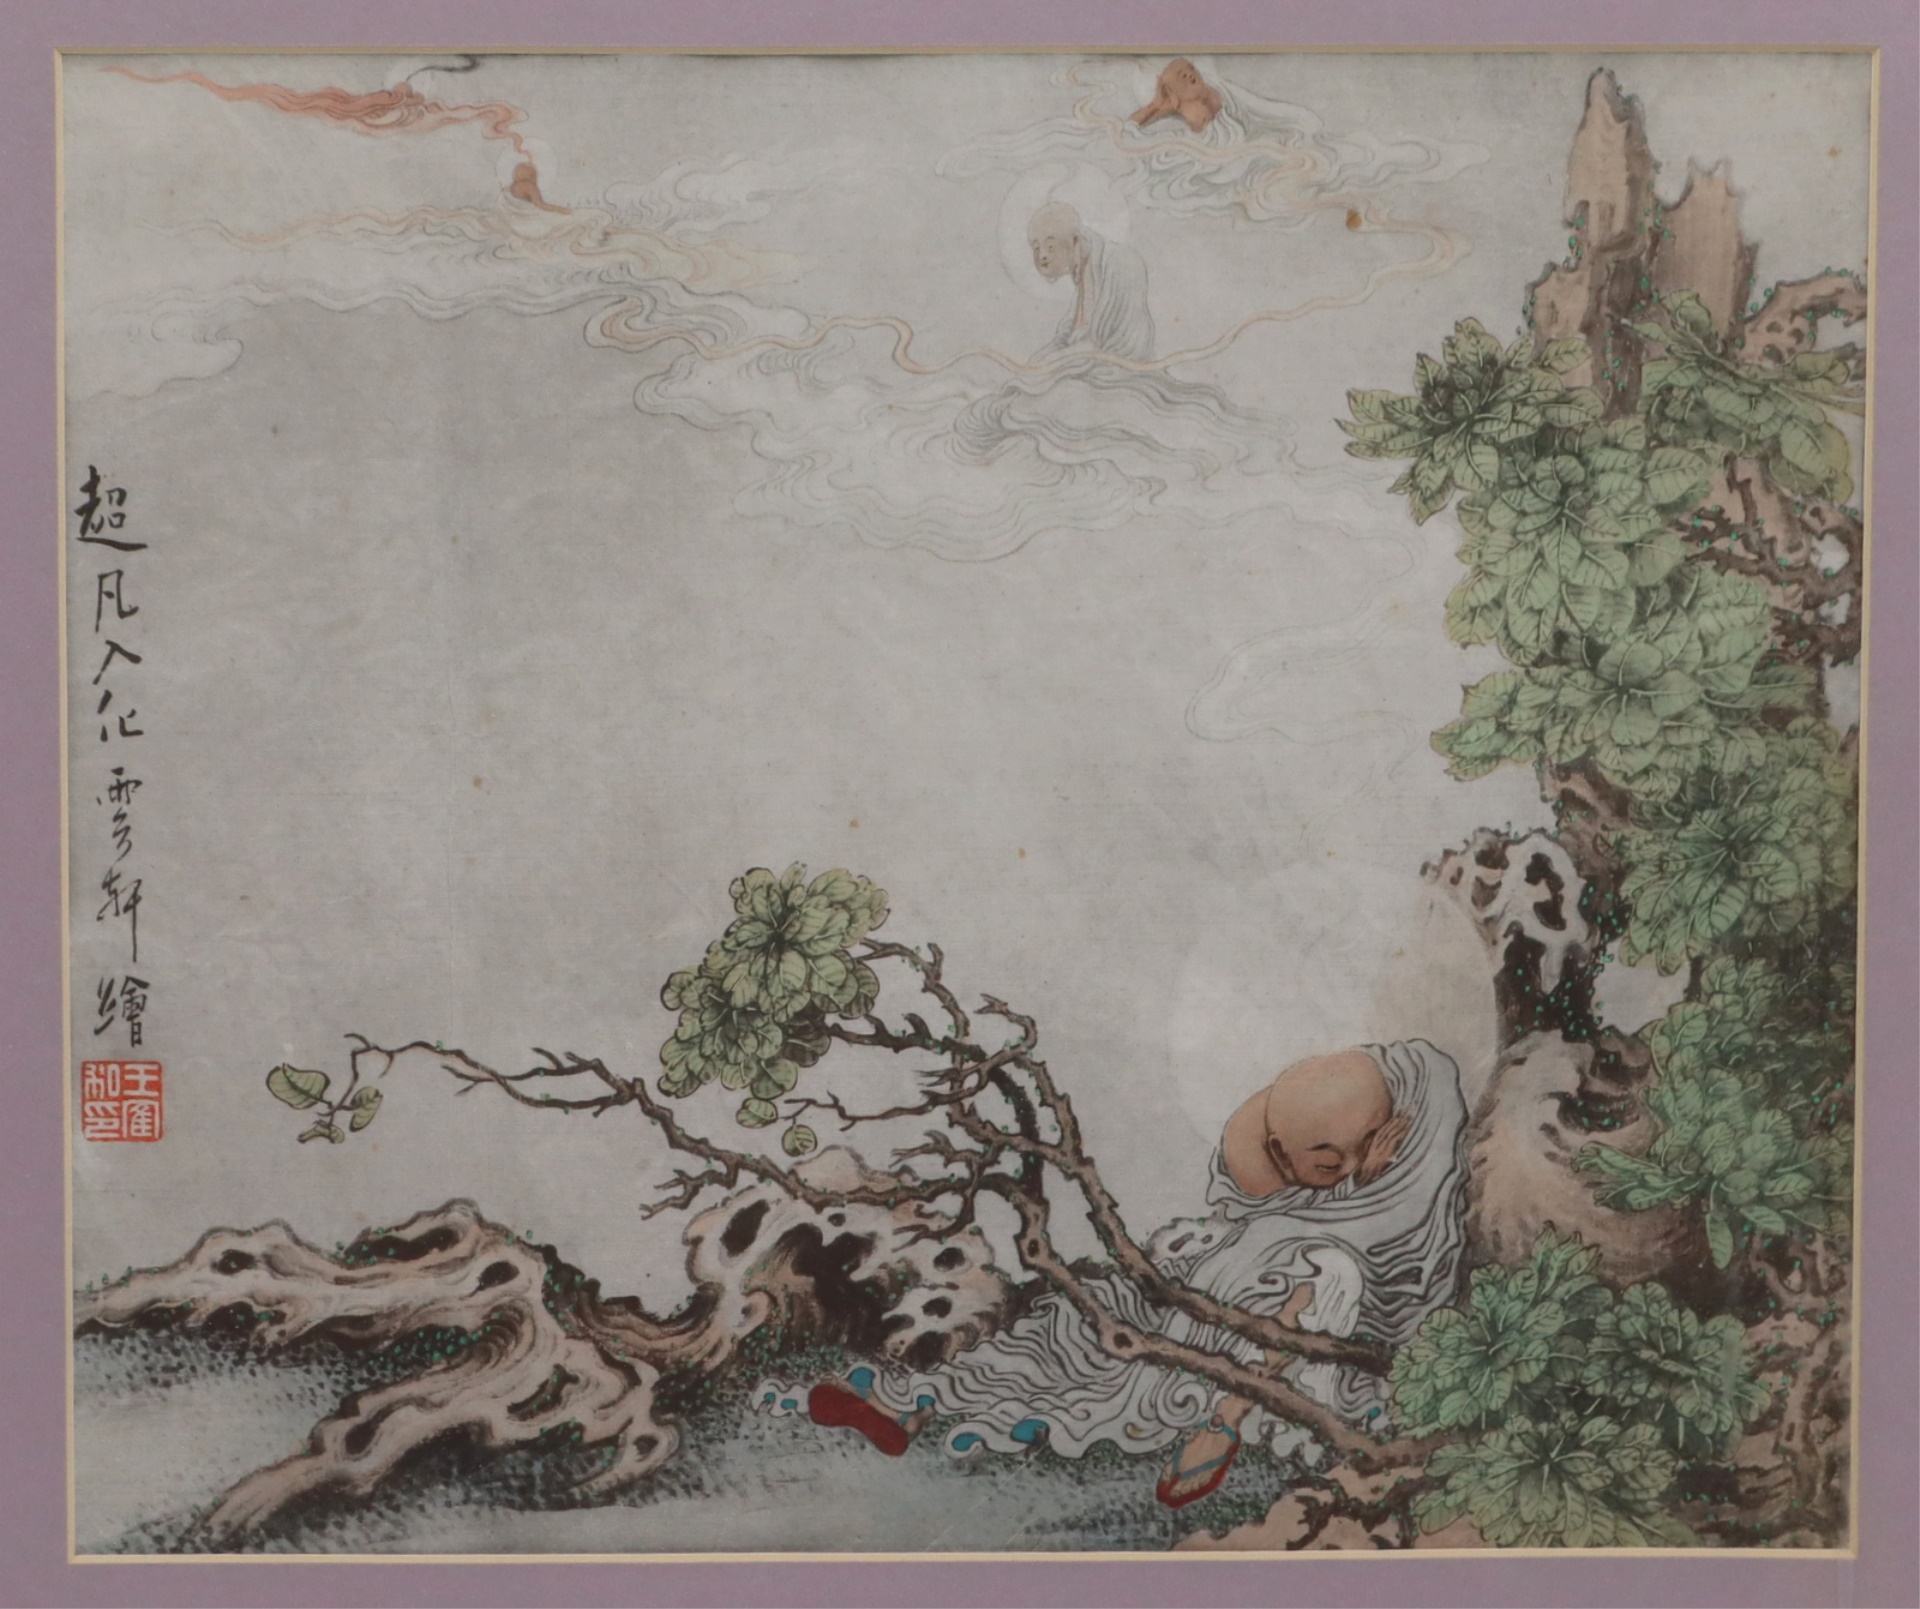 SIGNED ASIAN PAINTING OF A SLEEPING